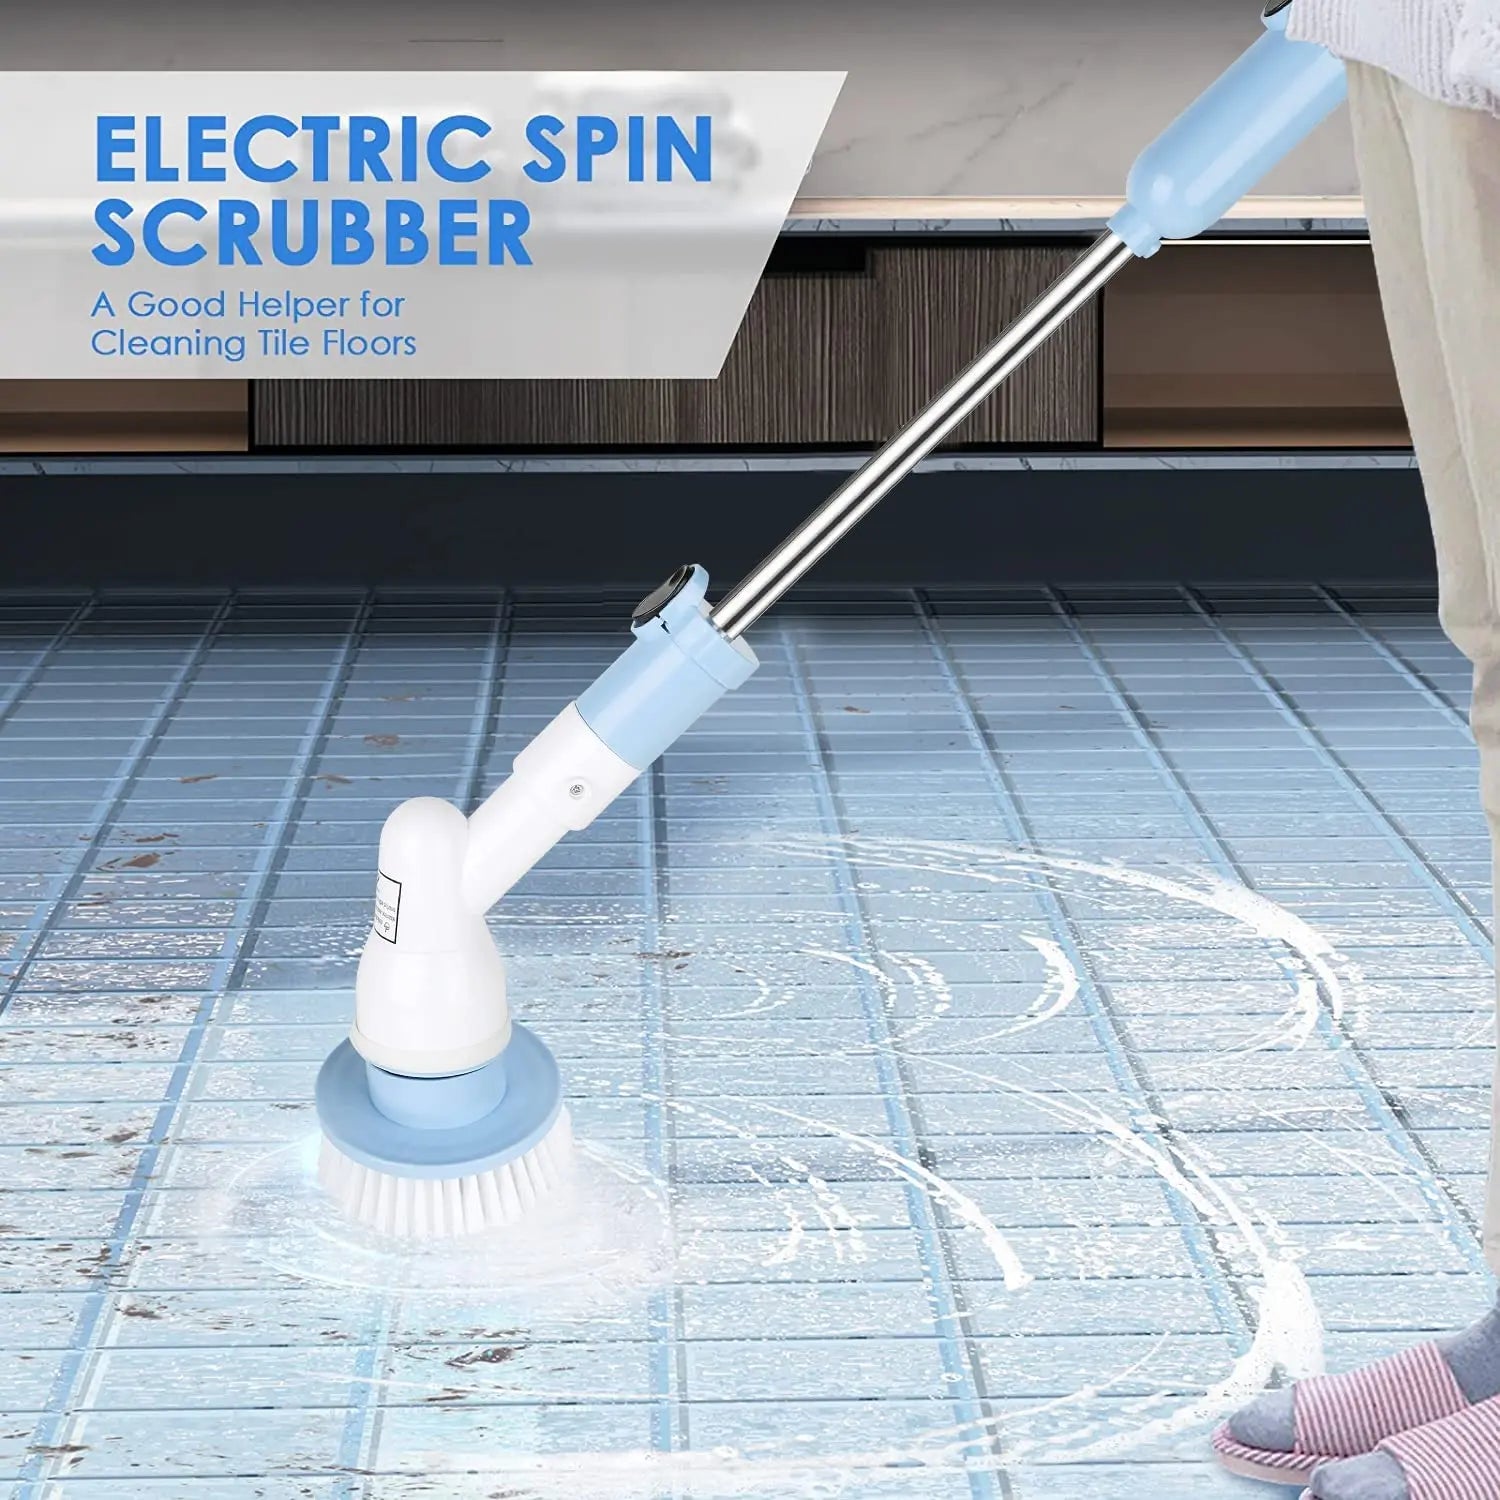 Electric Spin Scrubber,Electric Cleaning Brush With Handle,Power Scrubbers For Cleaning Bathroom